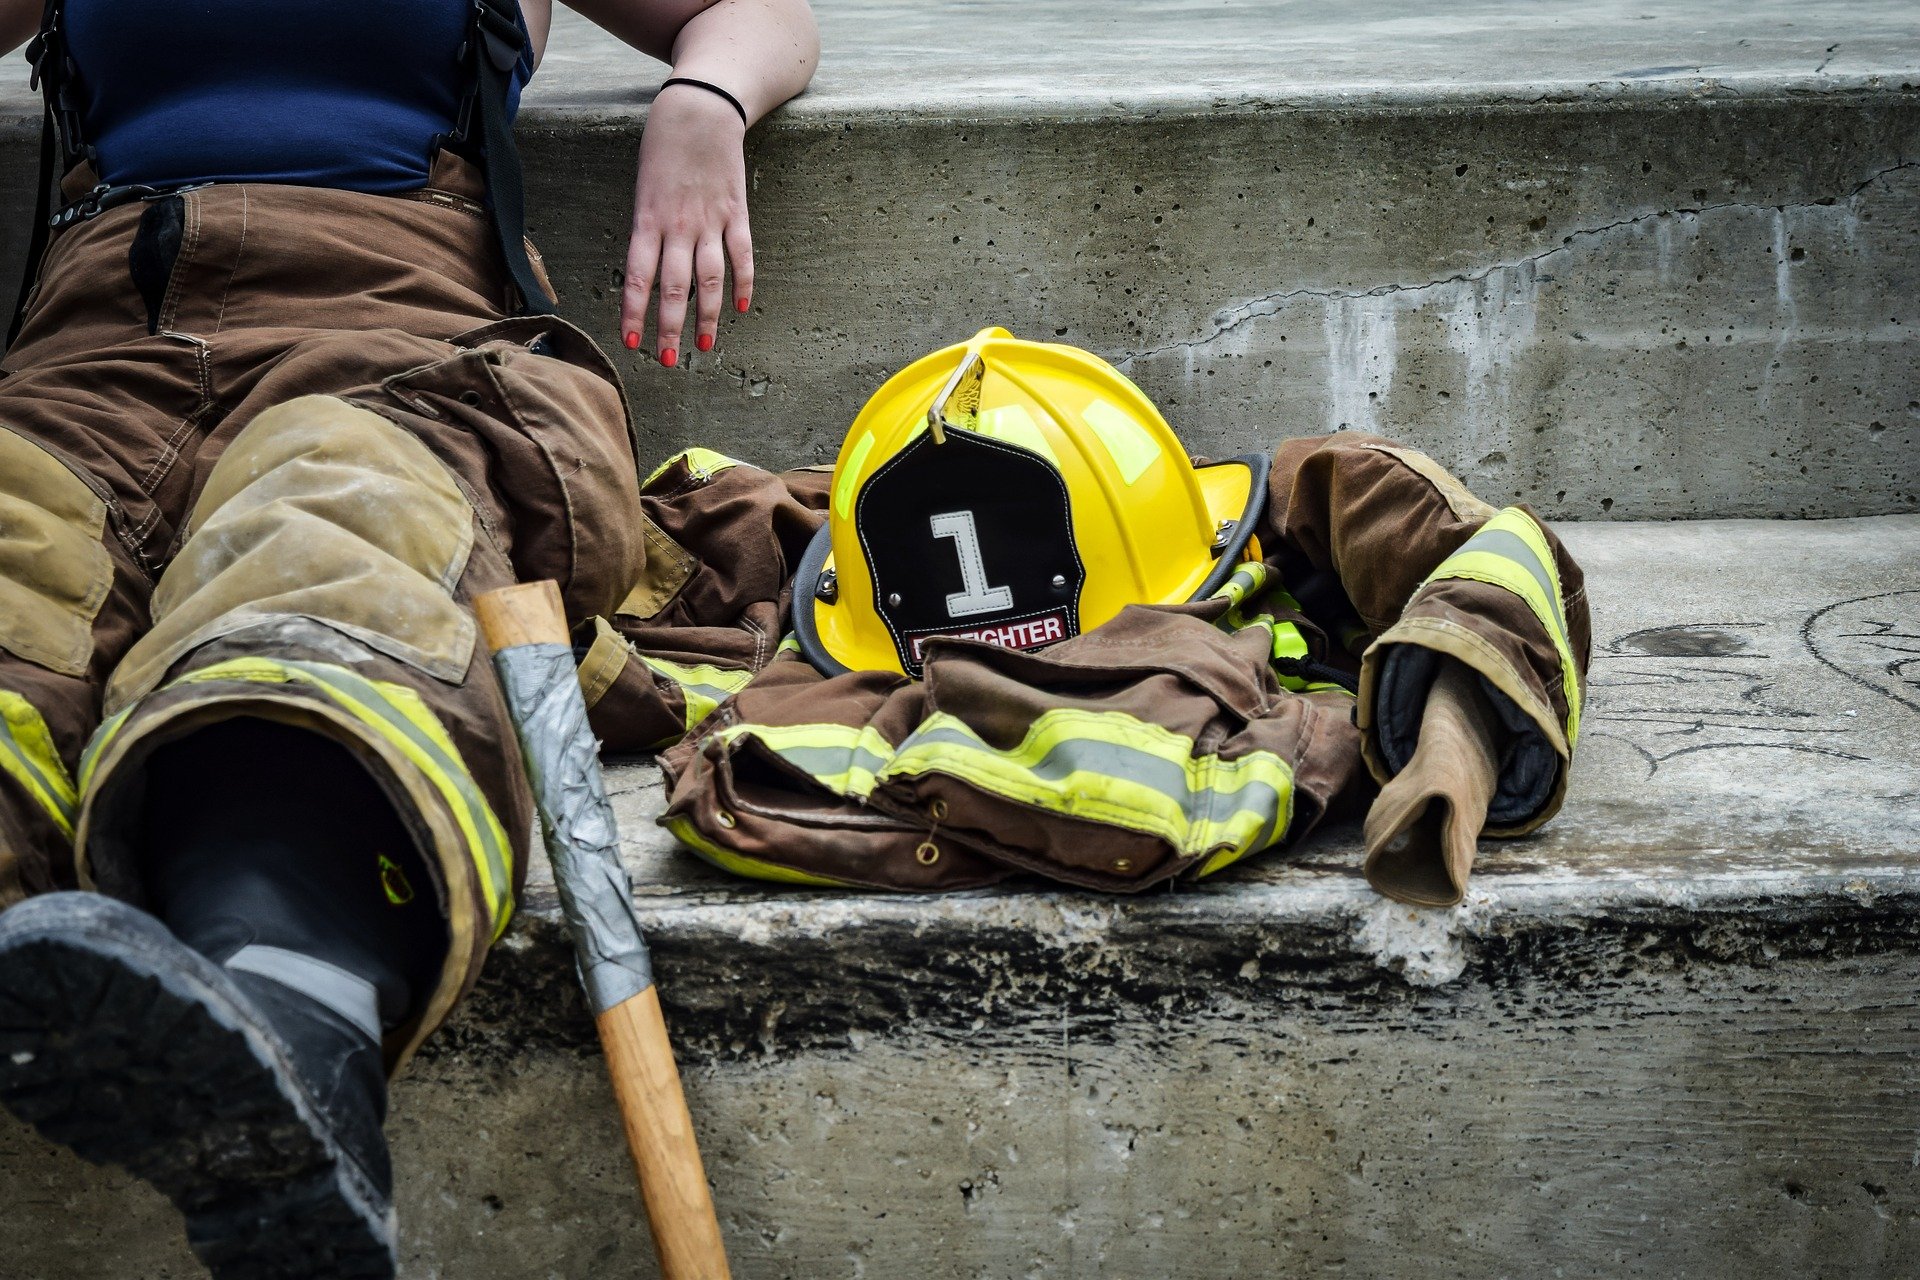 Vicarious trauma: Understanding traumatic stress in first responders